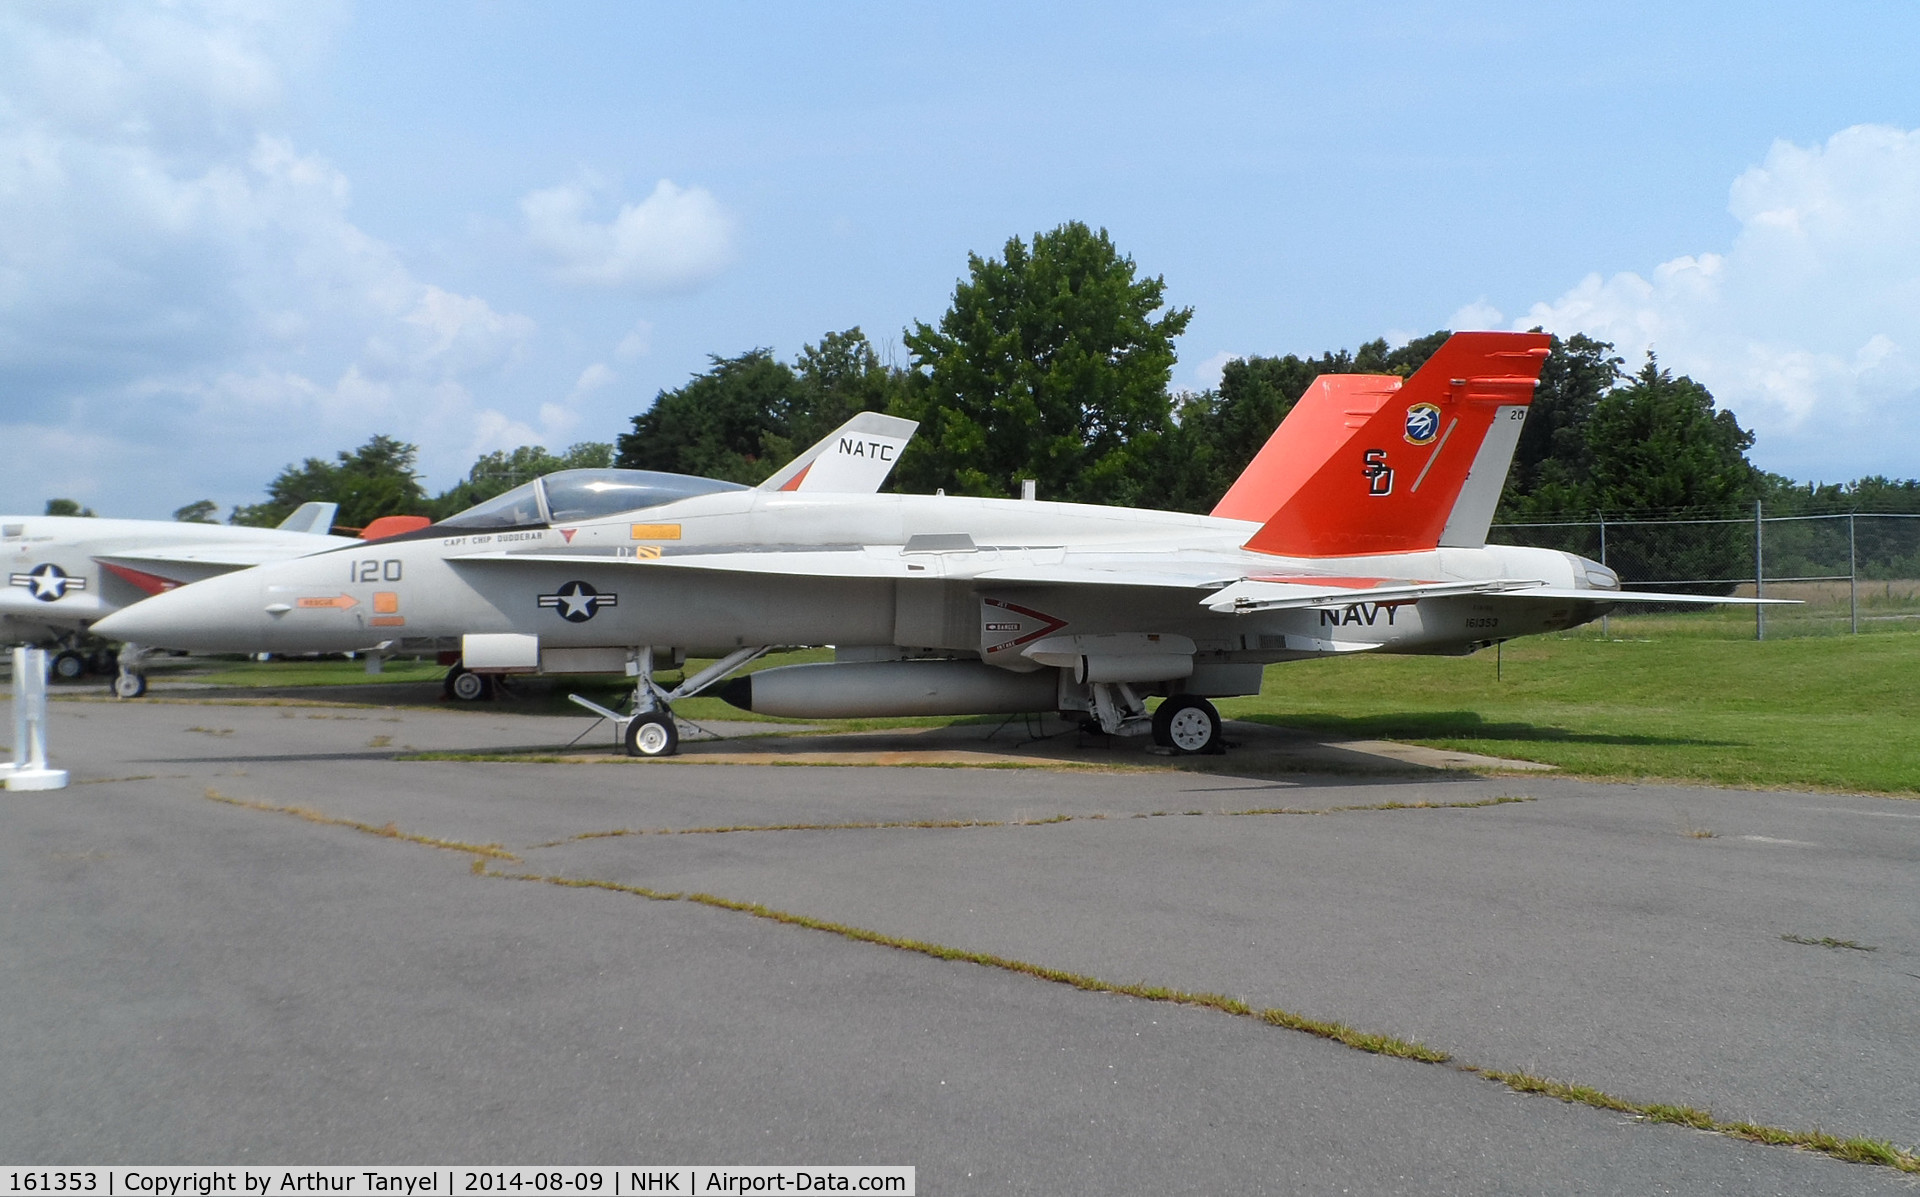 161353, McDonnell Douglas F/A-18A Hornet C/N 0021, On display @ the Patuxent River Naval Air Museum